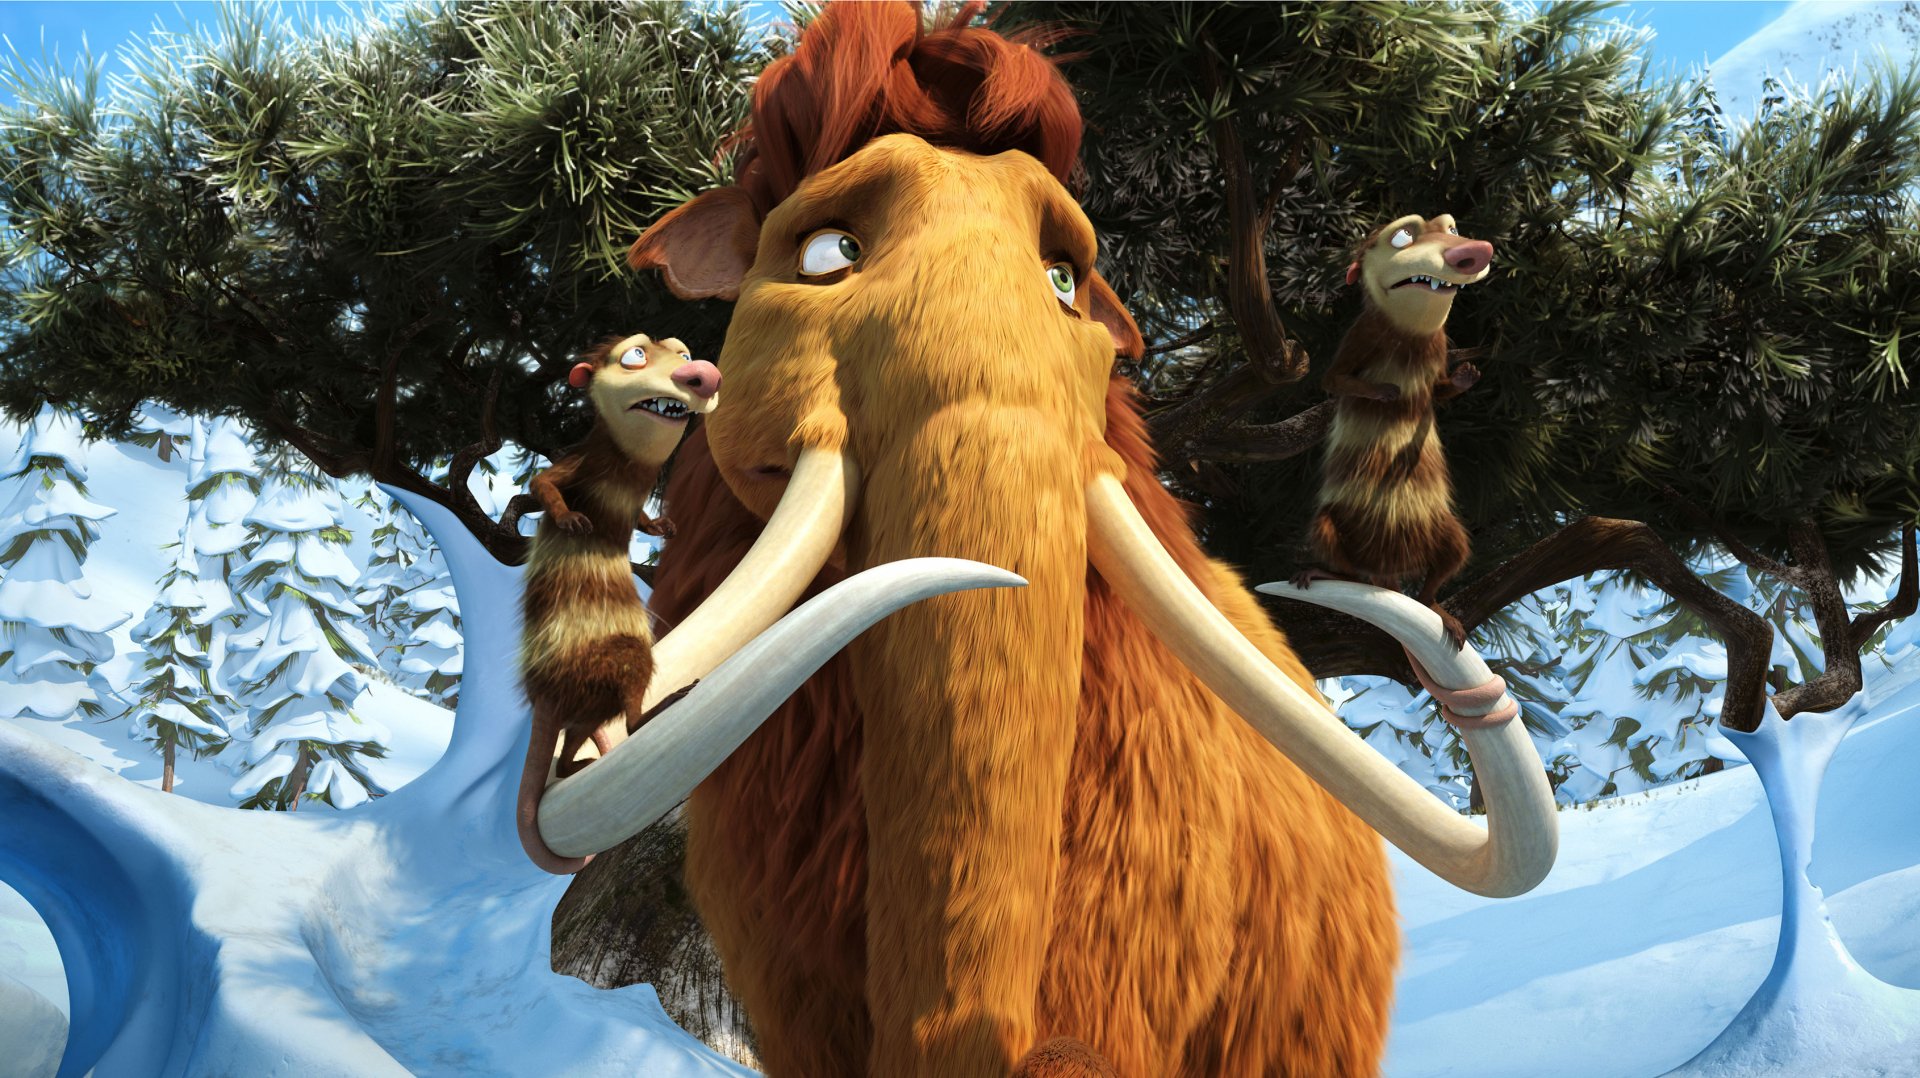 for mac download Ice Age: Dawn of the Dinosaurs